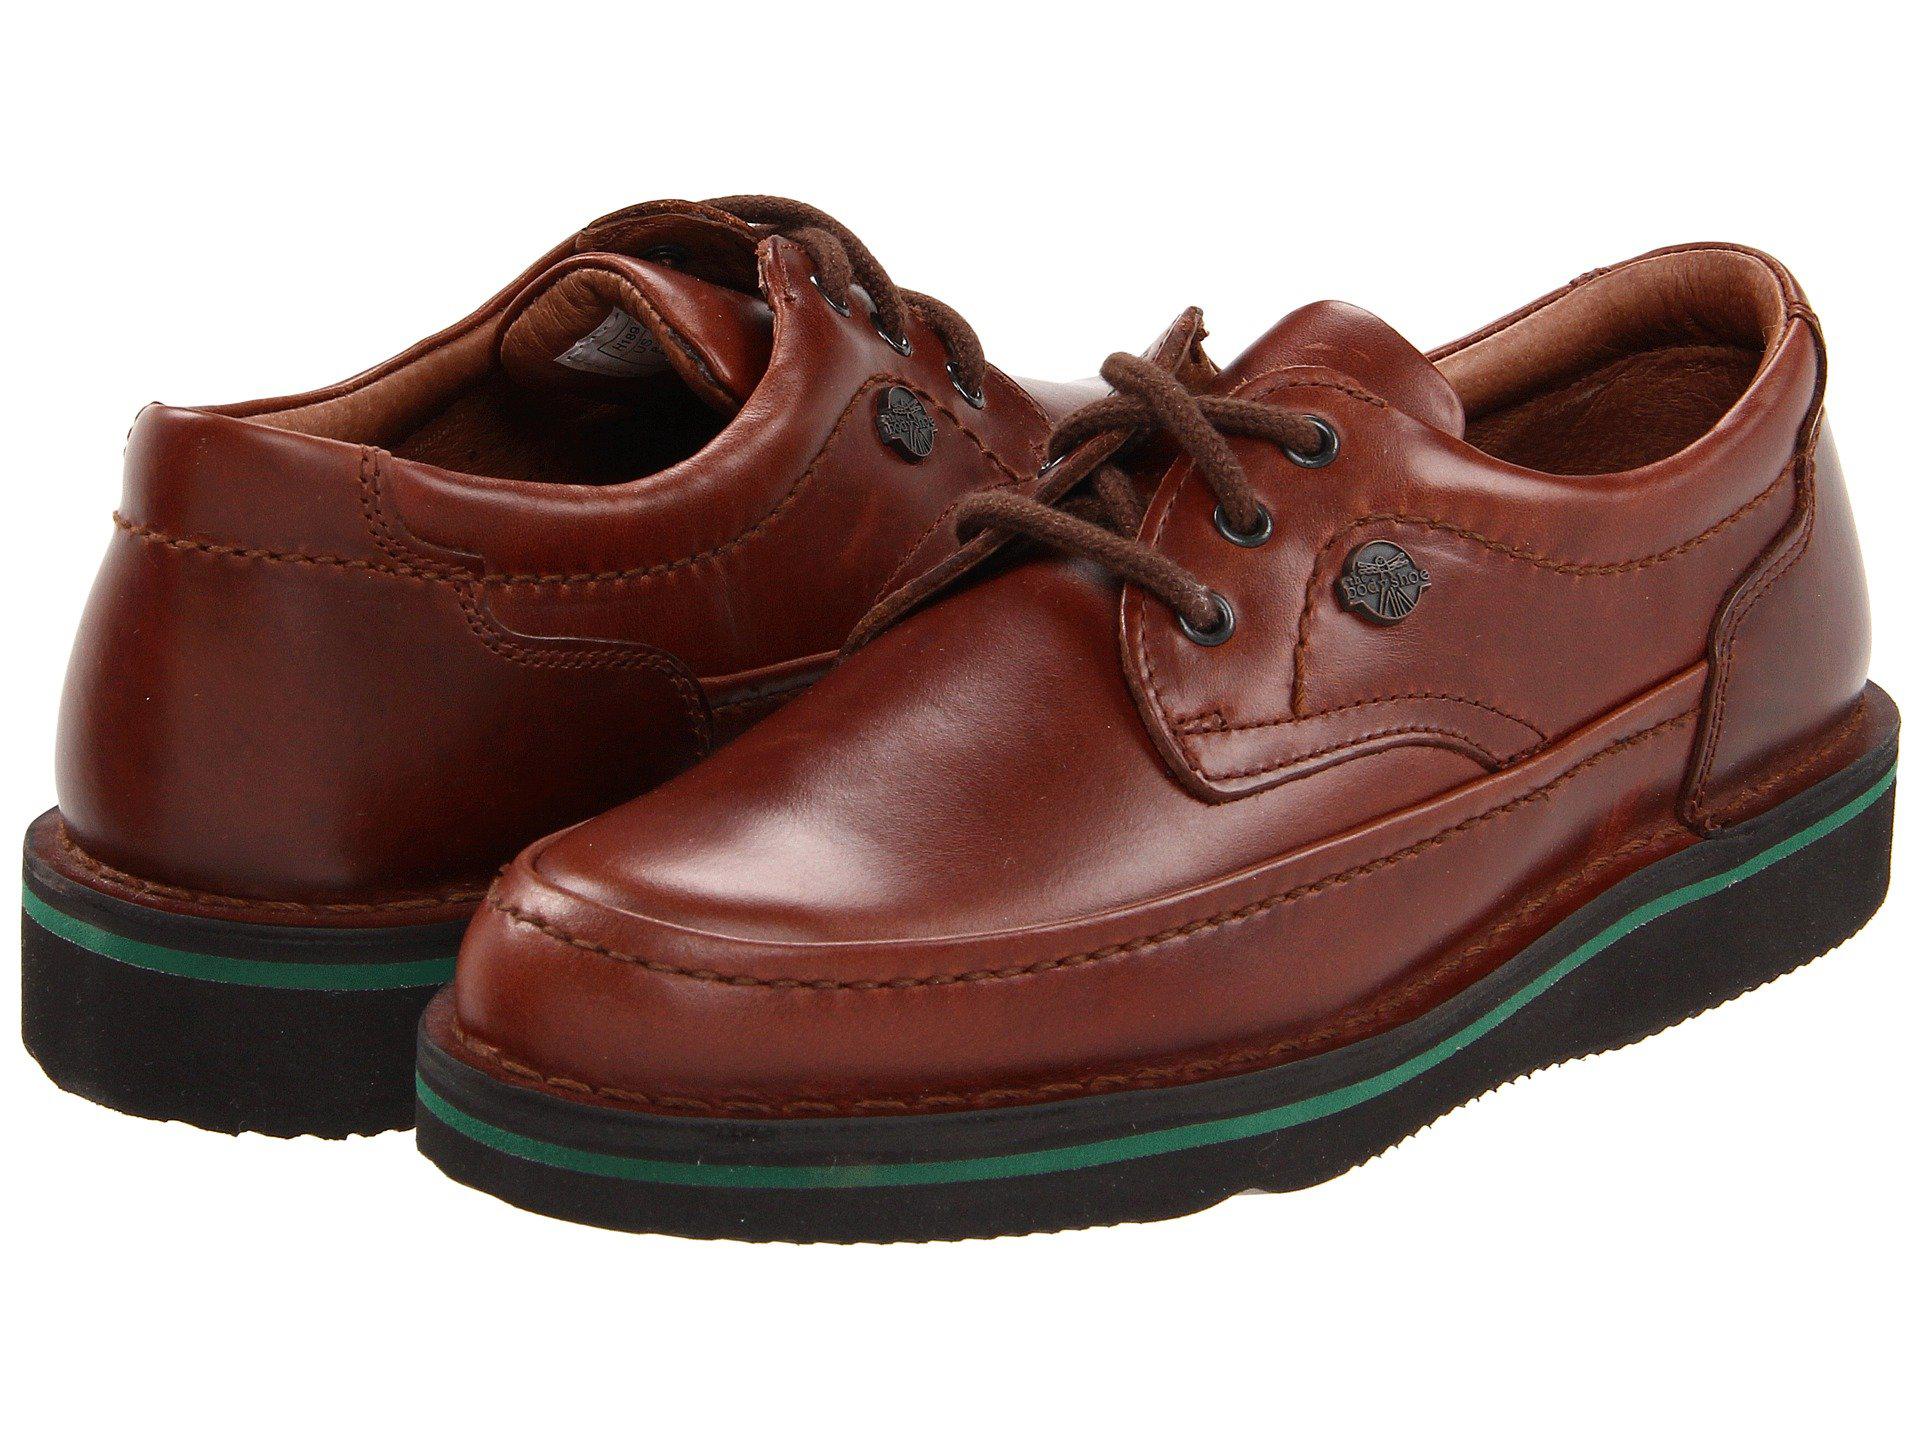 Lyst - Hush Puppies Mall Walker (antique Brown Leather) Men's Lace Up ...